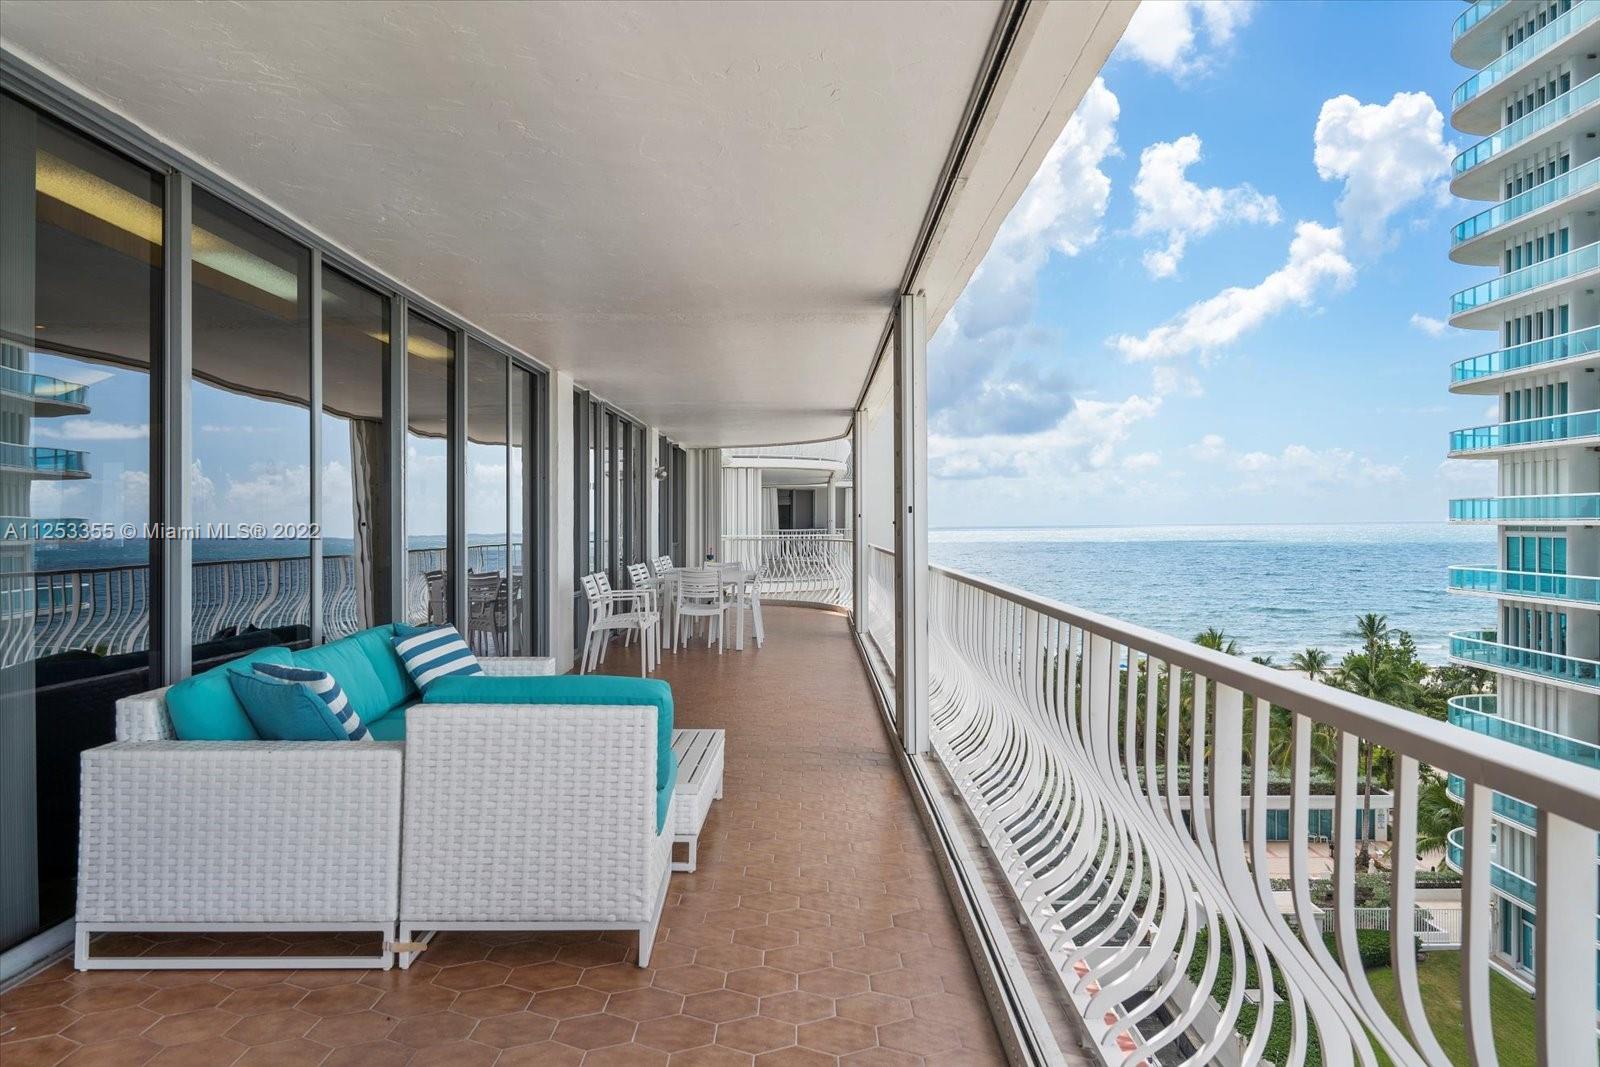 Hurry! Won't Last! Highly desired beachfront building in the heart of luxurious Bal Harbour. 3 bedrooms & 3.5 bathrooms, 3,340 SF, and a massive balcony with both Ocean and City views. This is an Interior Designer's dream; the perfect unit for someone to add their personal touch. Enormous master suite featuring his/her bathrooms, 2 walk-in closets & sitting area. This prestigious building was recently renovated by world-renowned architect Kobi Karp. Enjoy ultra-luxurious beachfront living with 24-hour valet, state-of-the-art gym, on-site restaurant, pool and beach service, social room, movie theater, hot tub, and more. Walking distance to Bal Harbour Shops and the best restaurant in town, Thomas Keller, at the Surf Club.